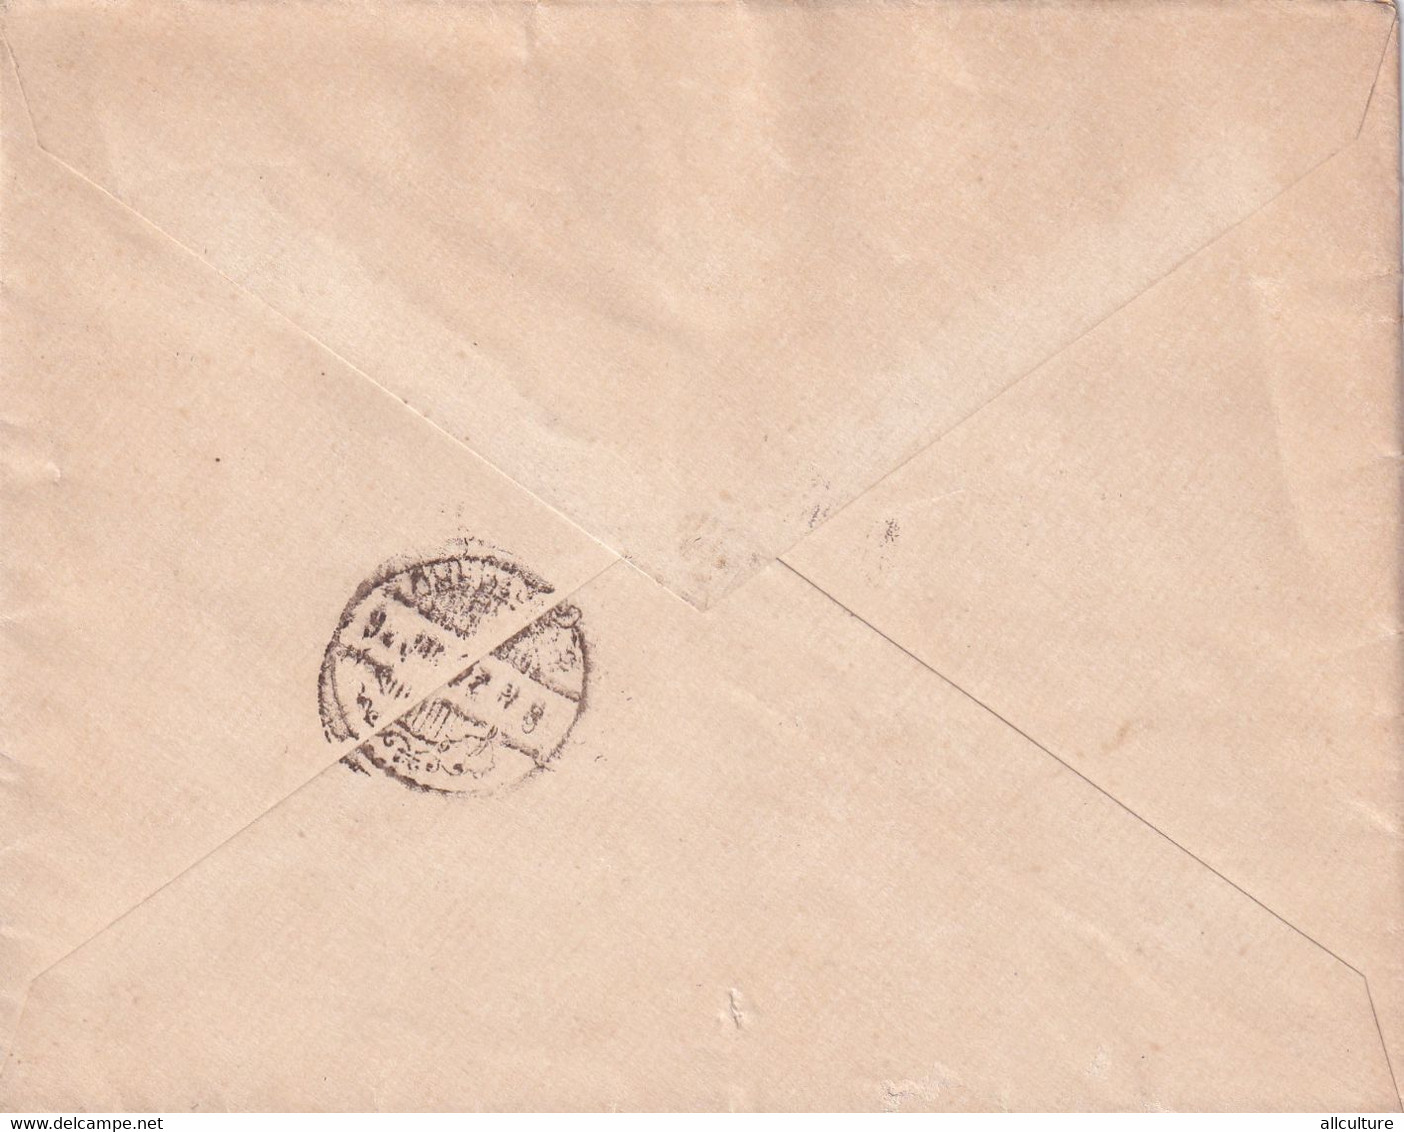 A8483- LETTER  FROM SZAMOS-UJVAR CLUJ ROMANIA TO KOLOZSVAR STAMP ON COVER 1892 MAGYAR POSTA USED - Lettres & Documents